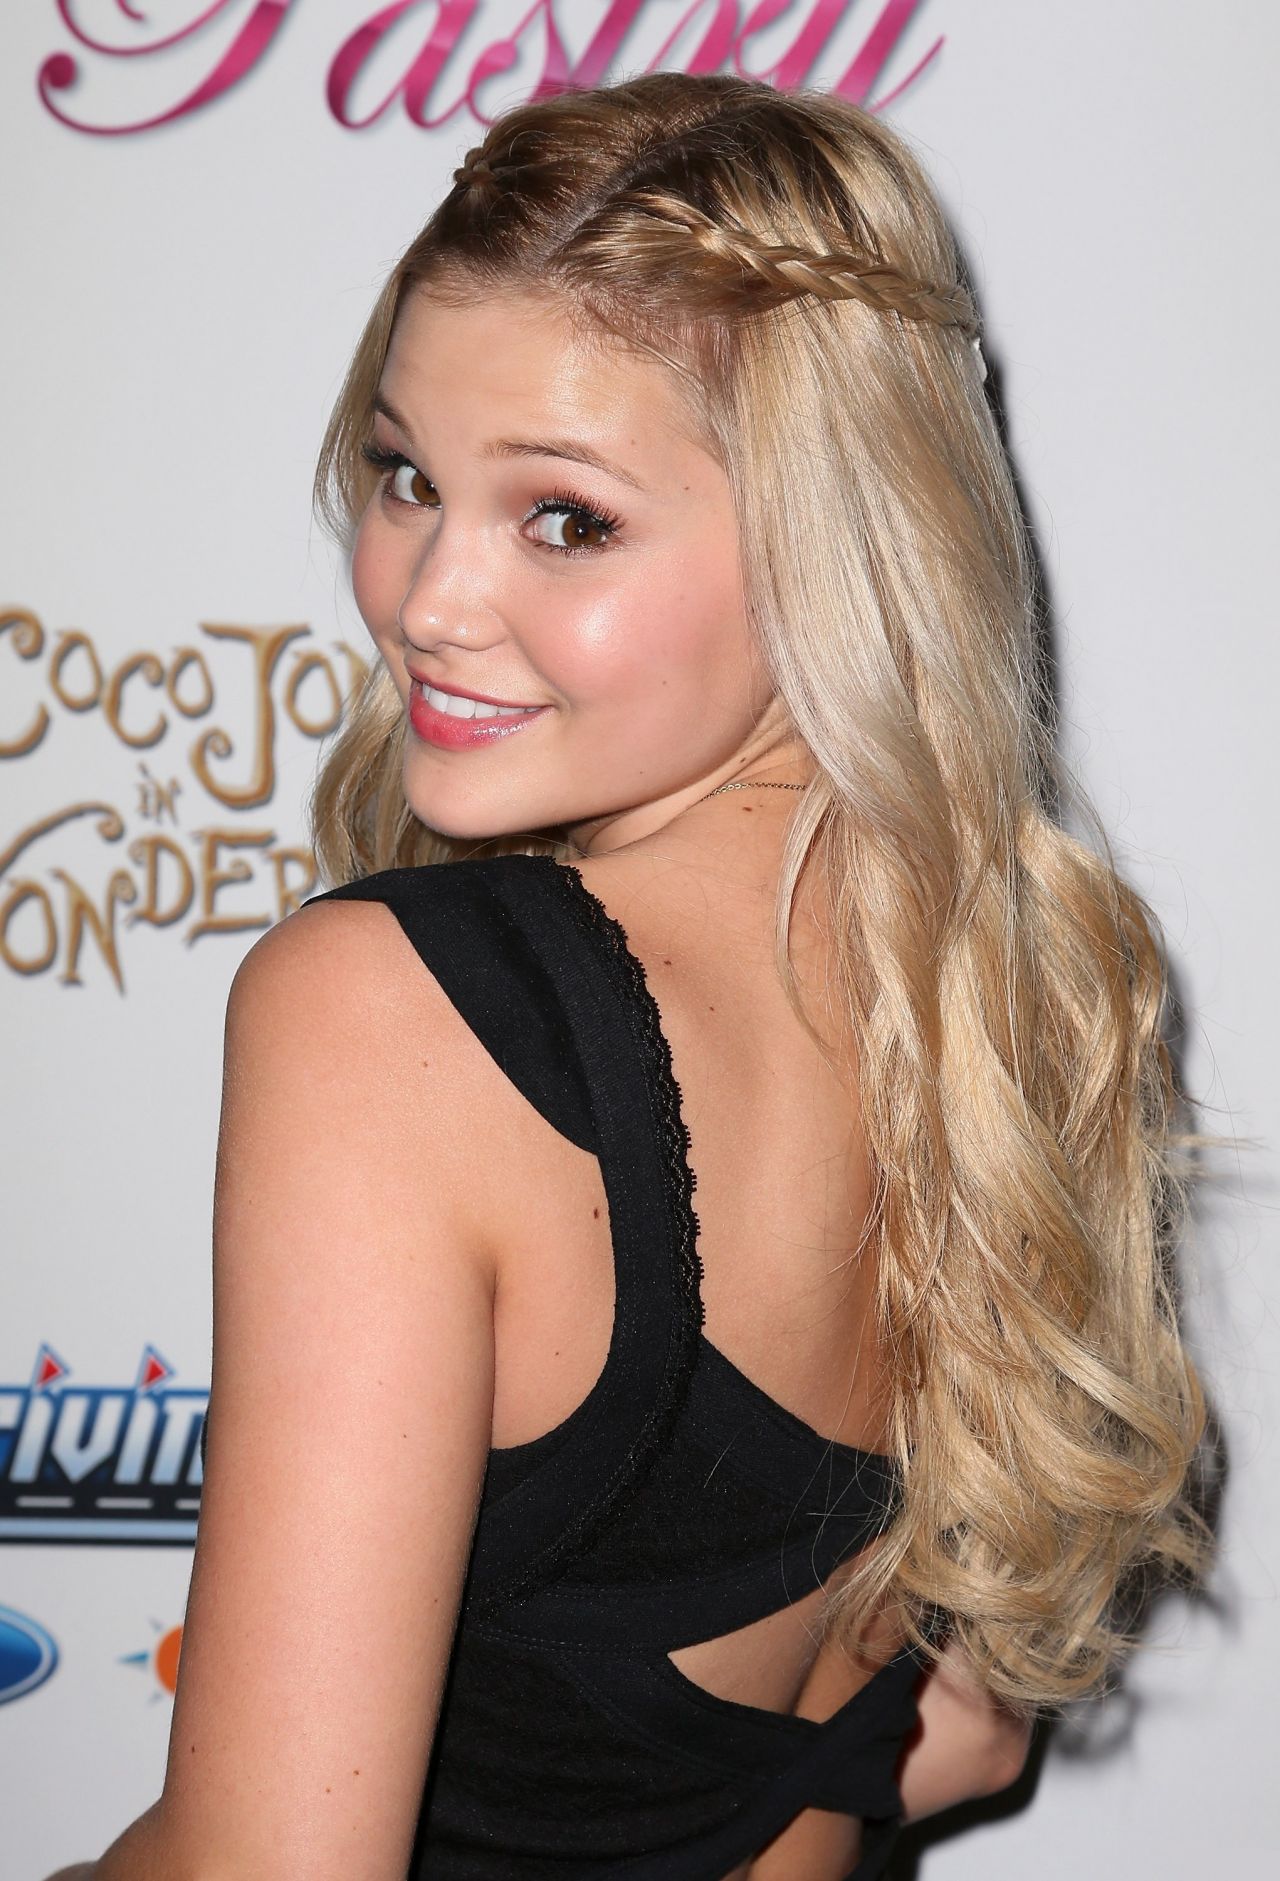 Olivia Holt 16 Birthday Party Hot Sex Picture